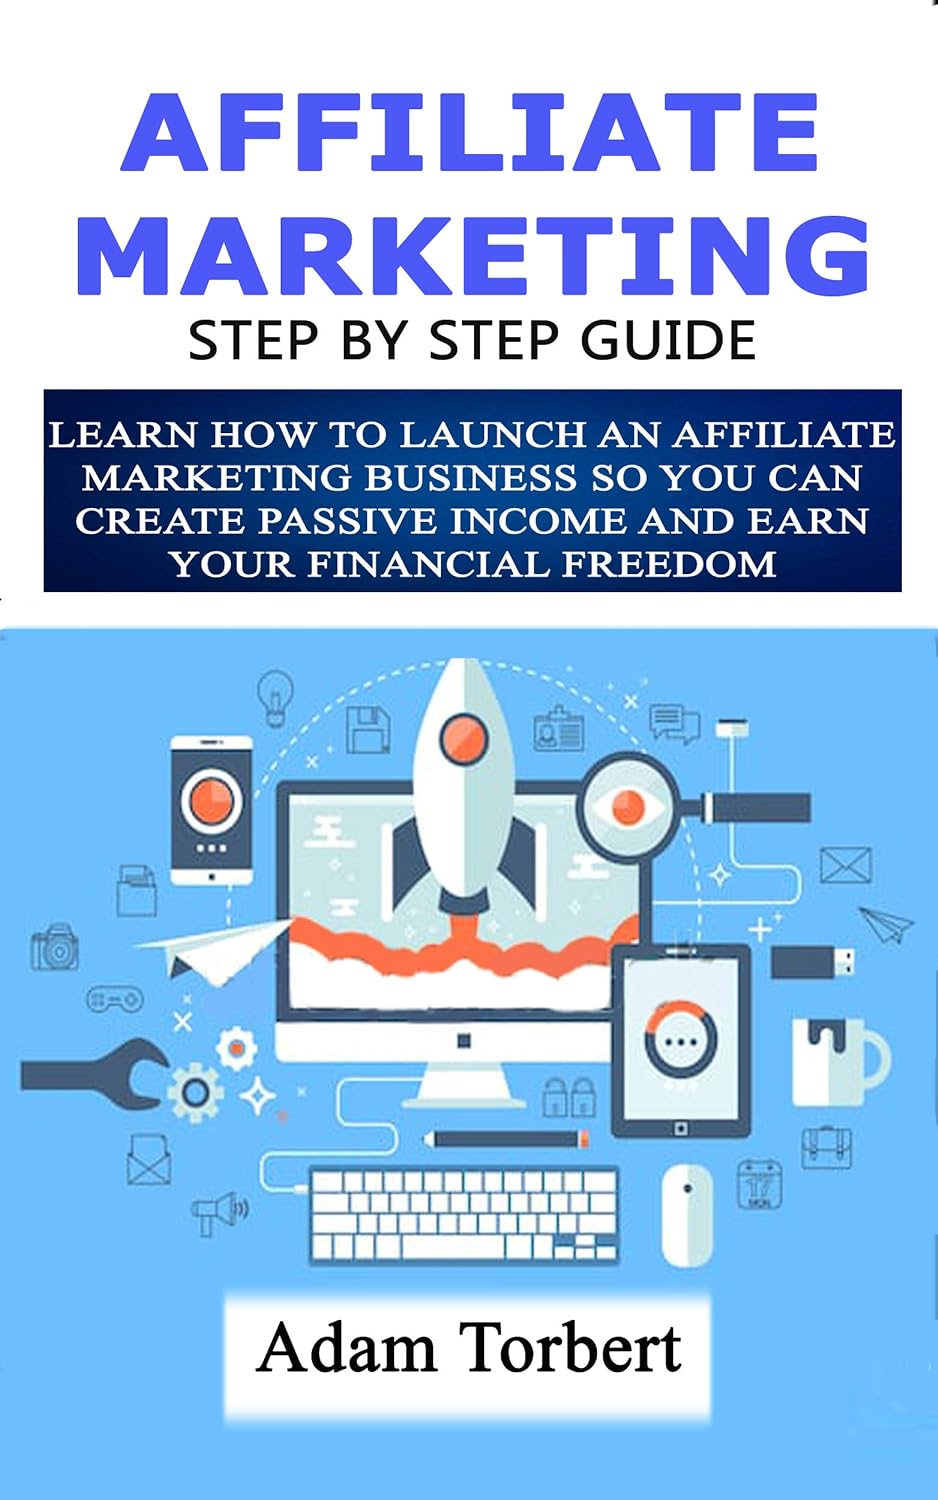 Affiliate Marketing Step By Step Guide Review